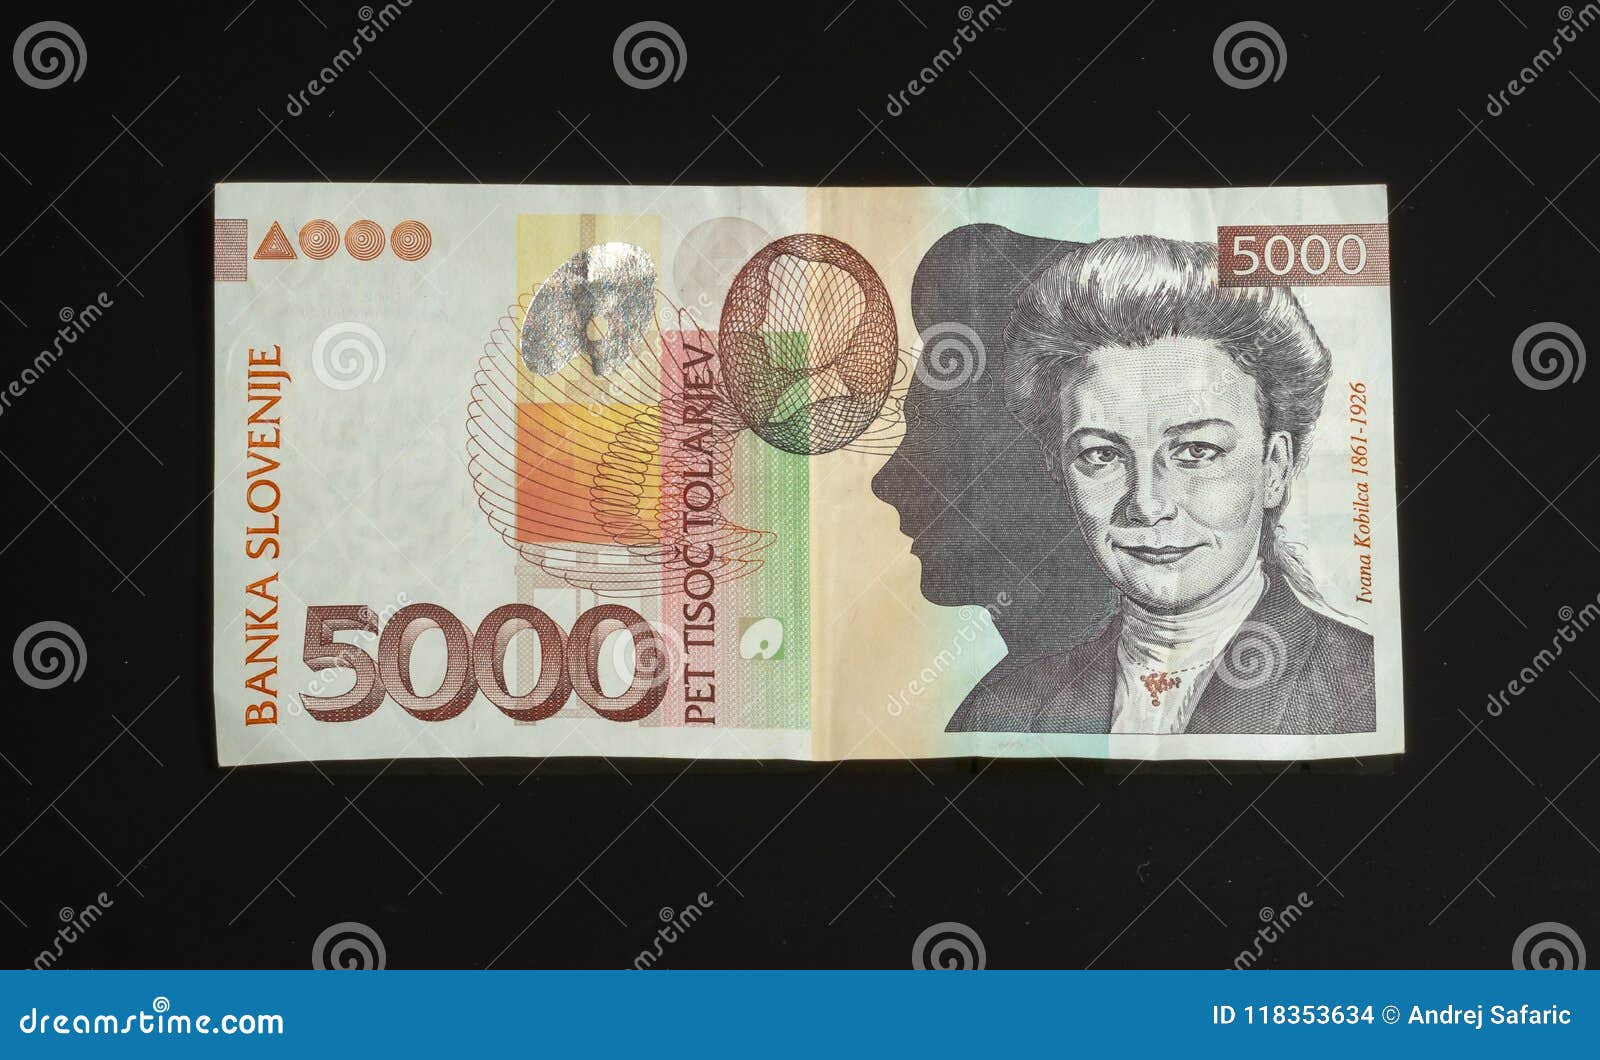 231 5000 Euro Photos Free Royalty Free Stock Photos From Dreamstime